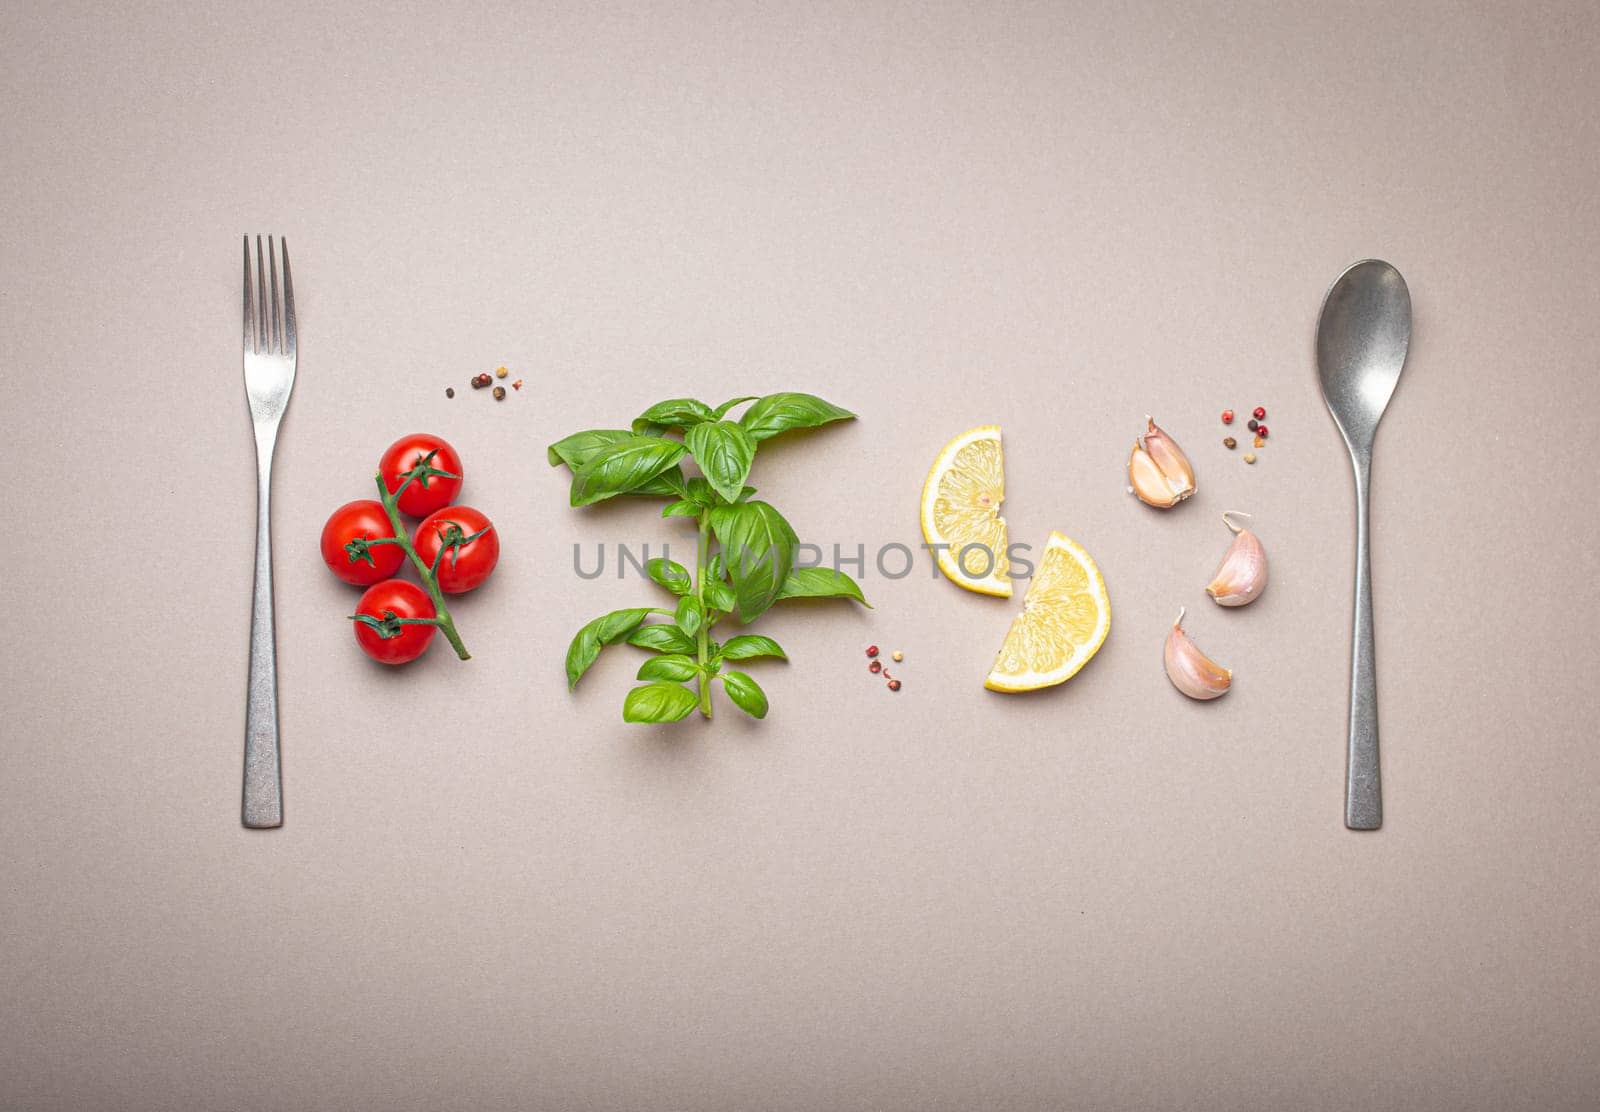 Composition with branch of fresh cherry tomatoes, basil branch, garlic cloves, lemon wedges, kitchen spoon and fork on minimalistic grey clean background, overhead shot by its_al_dente